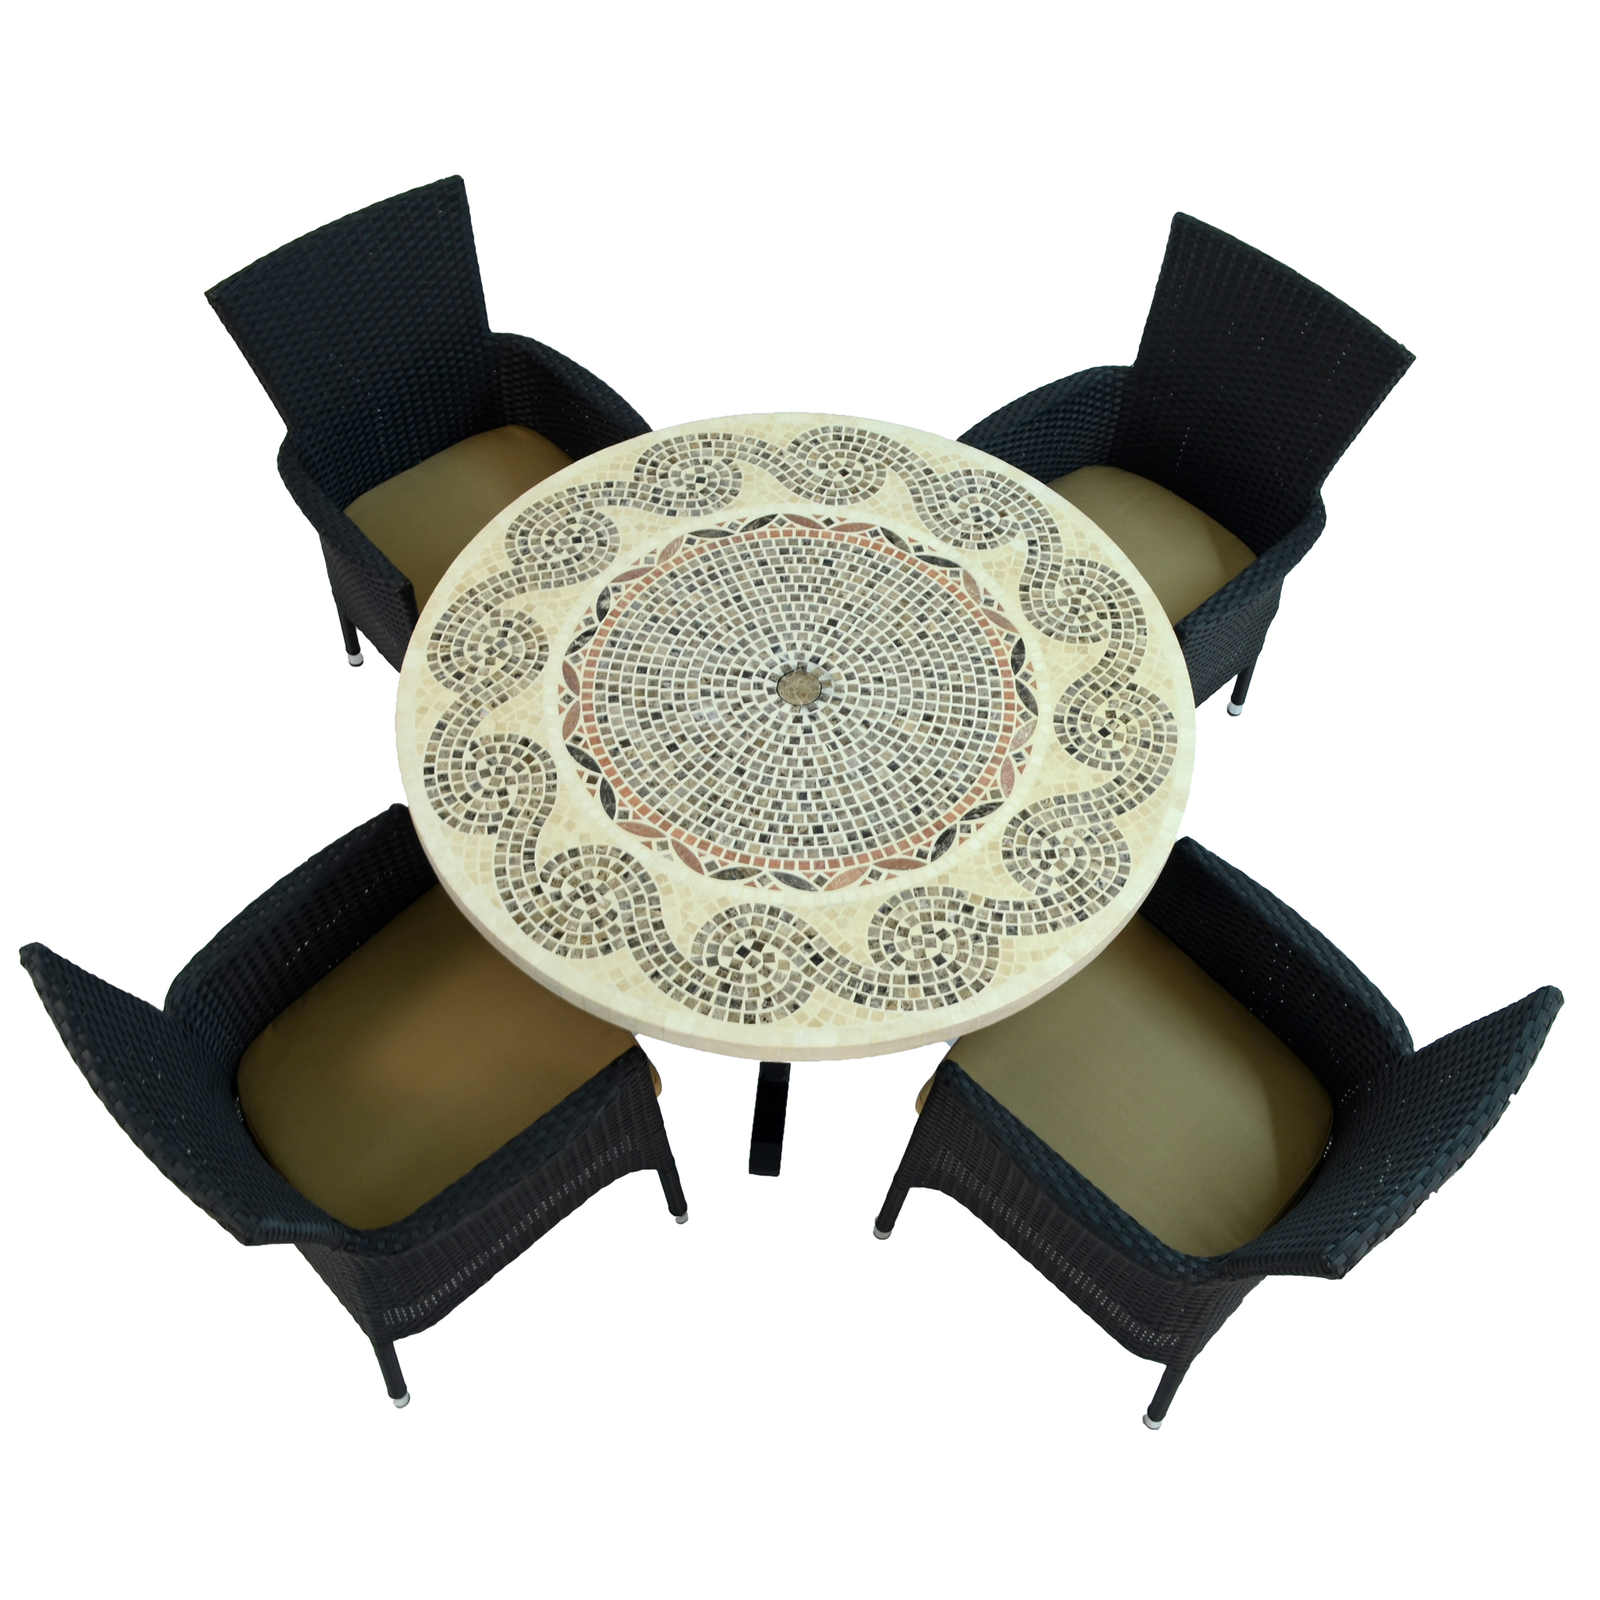 Byron Manor Avignon Mosaic Stone Garden Dining Table With 4 Stockholm Black Chairs